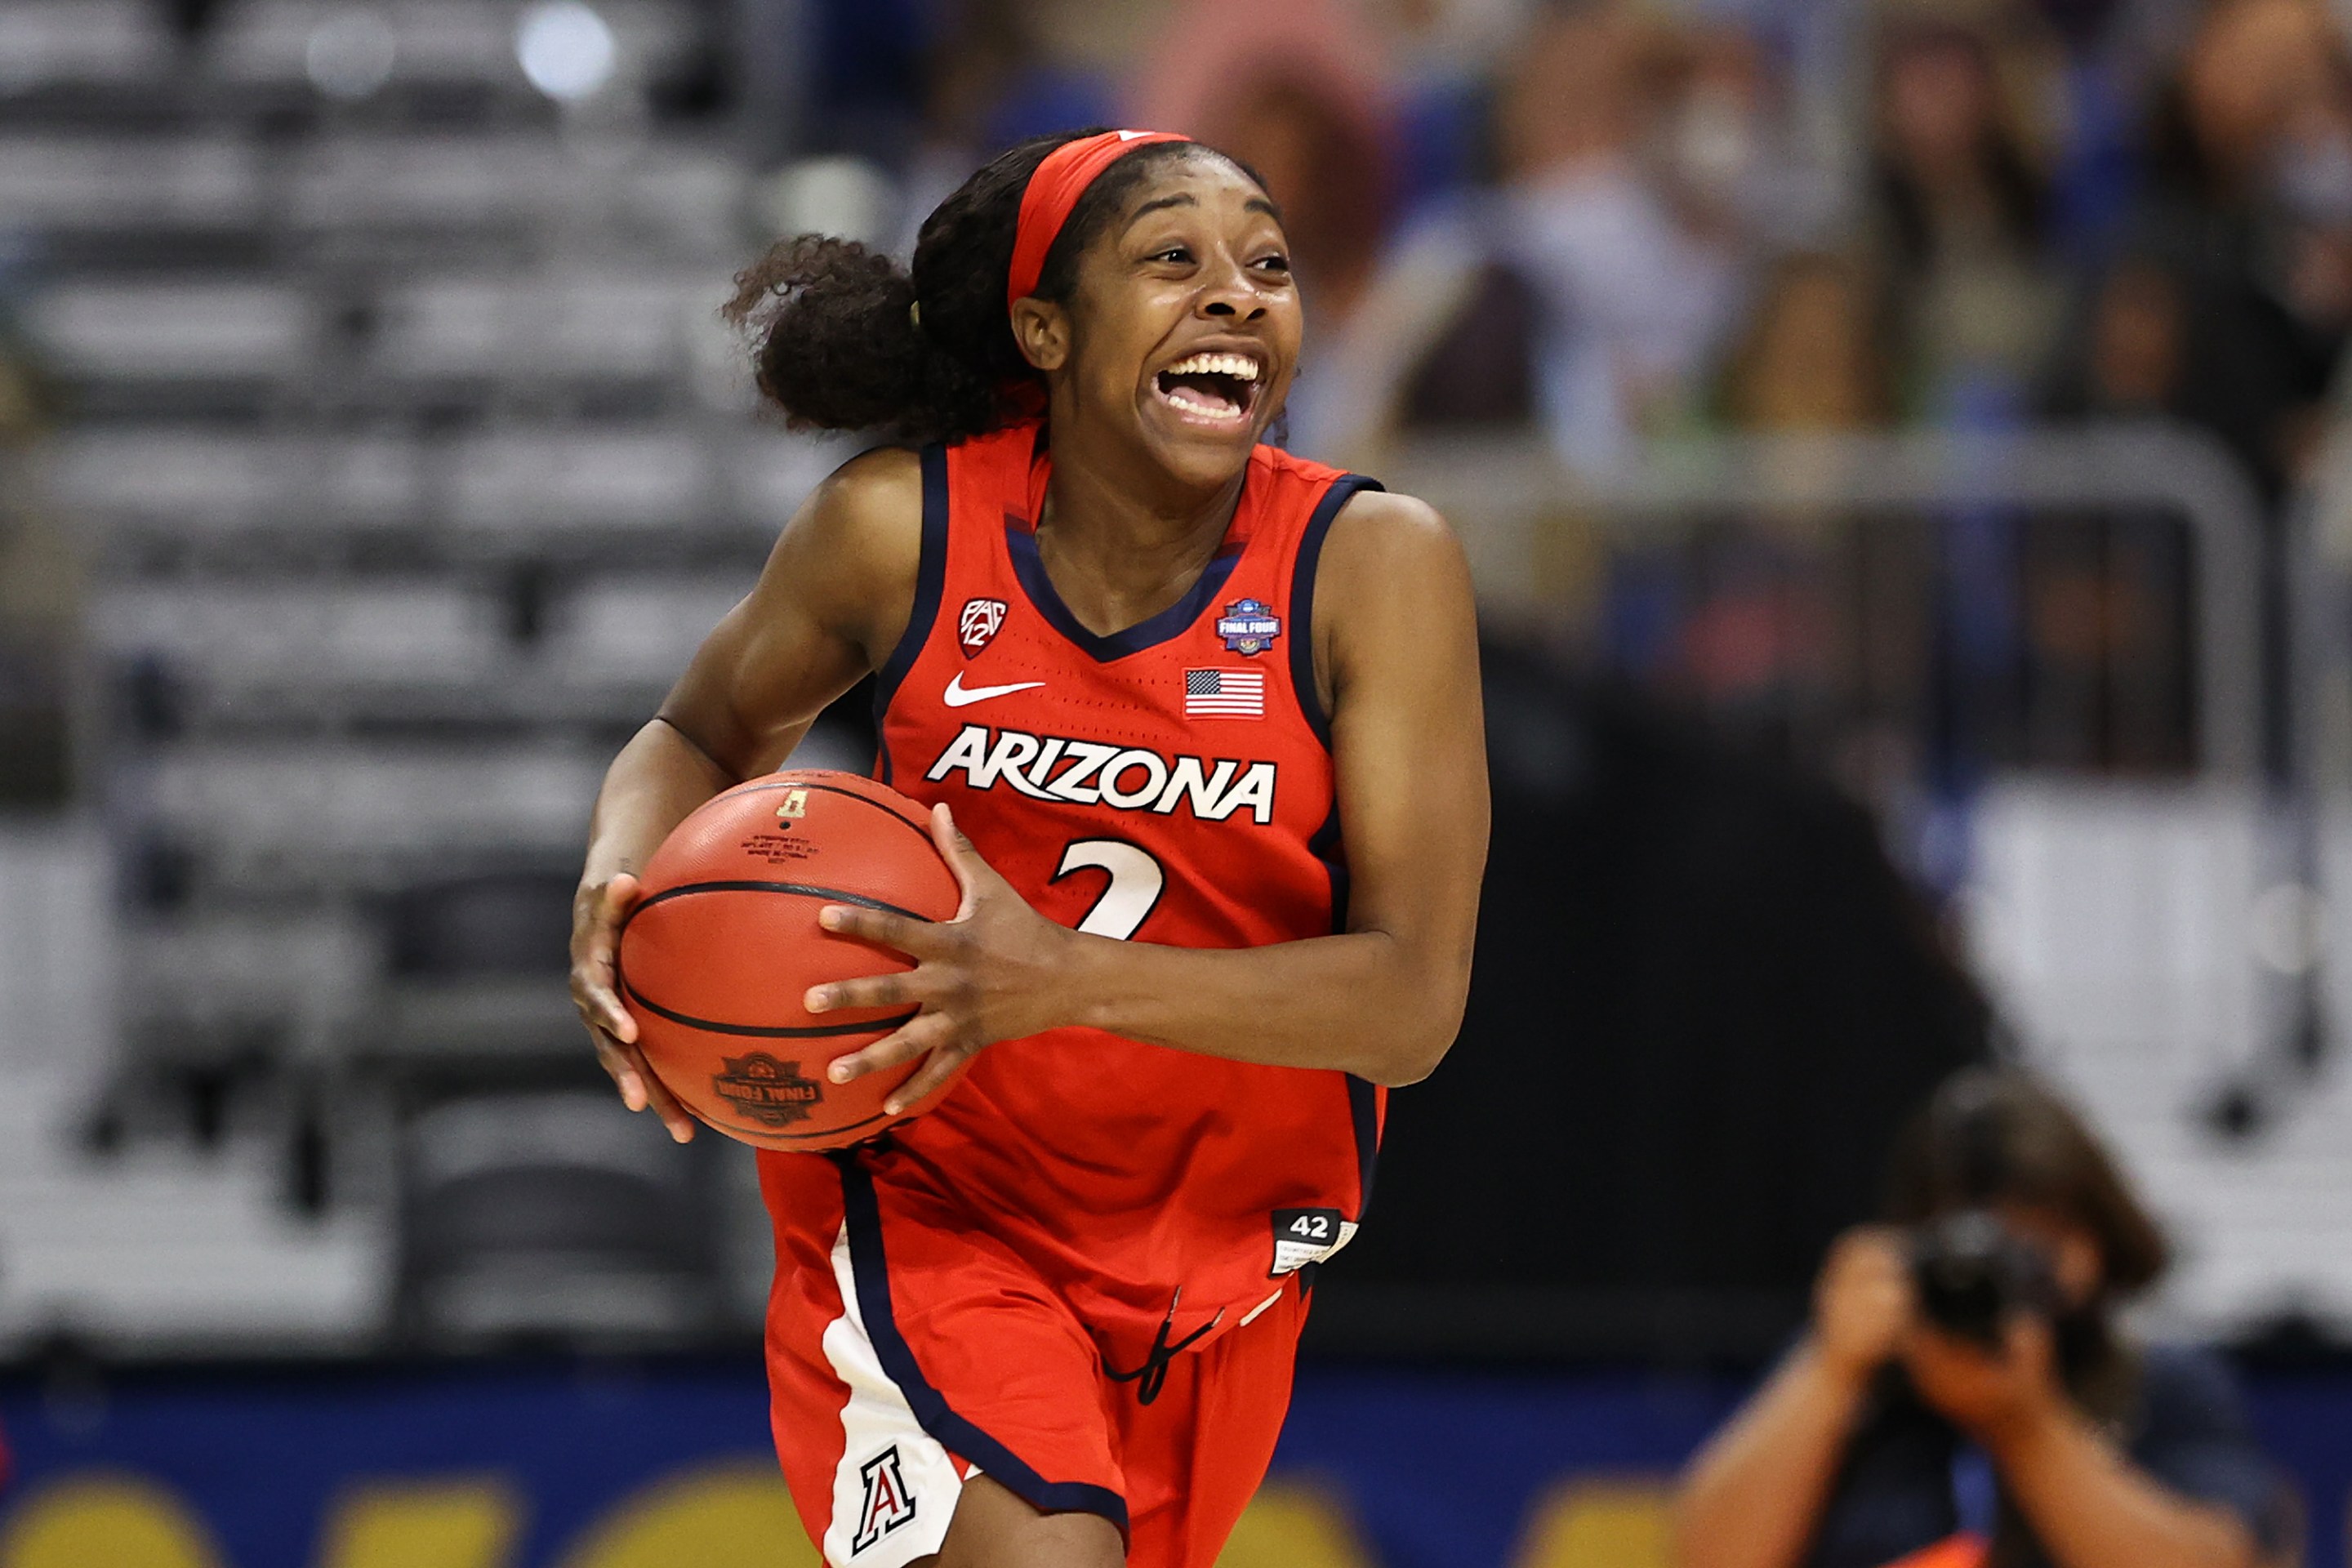 Aari McDonald #2 of the Arizona Wildcats celebrates after defeating the UConn Huskies during the third quarter in the Final Four semifinal game of the 2021 NCAA Women's Basketball Tournament at the Alamodome on April 02, 2021 in San Antonio, Texas. (